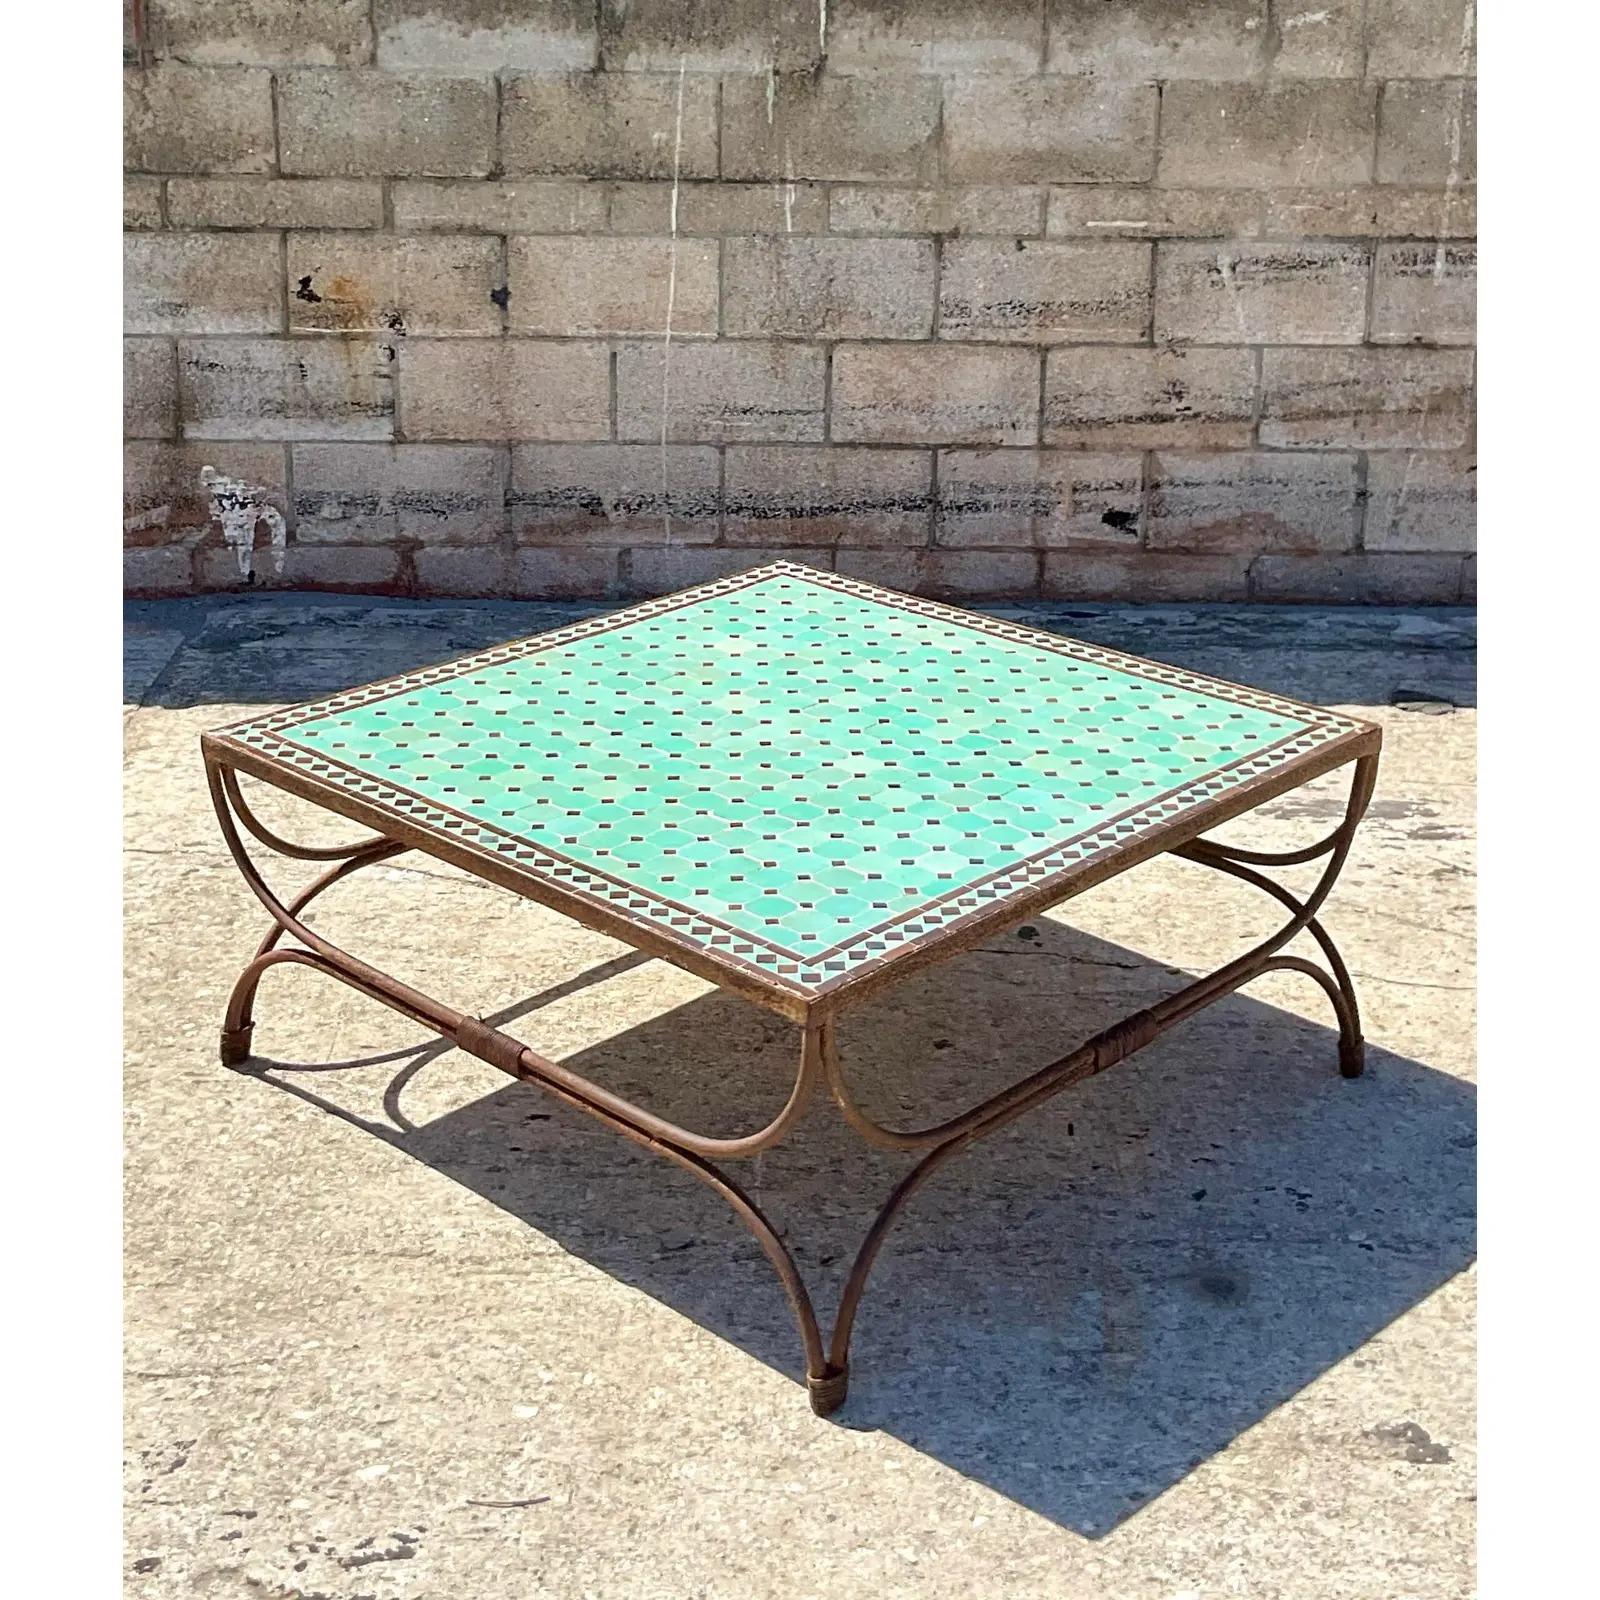 Fantastic vintage tile coffee table. Gorgeous green tiles with a chic distressed frame. Amazing dramatic look. Acquired from a Palm Beach estate.